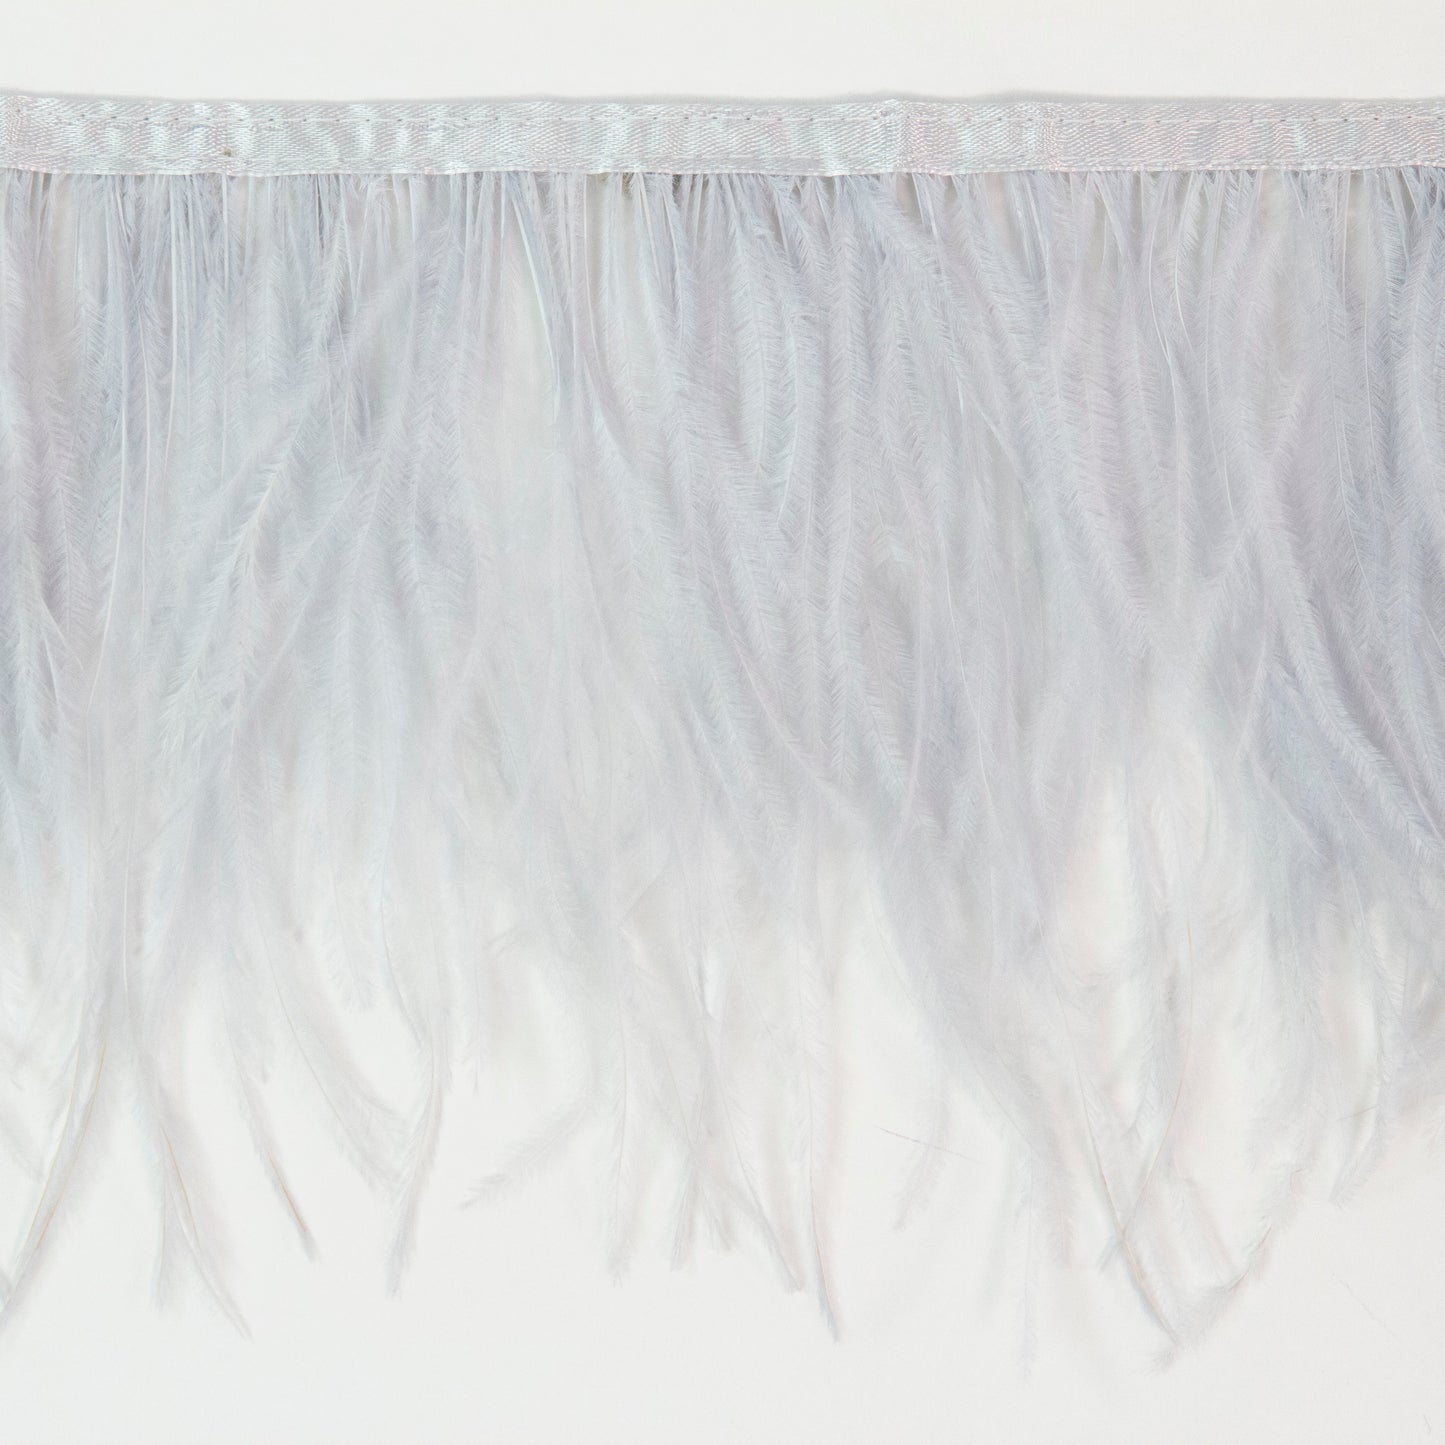 Ostrich Feather Fringe 2PLY - Silver